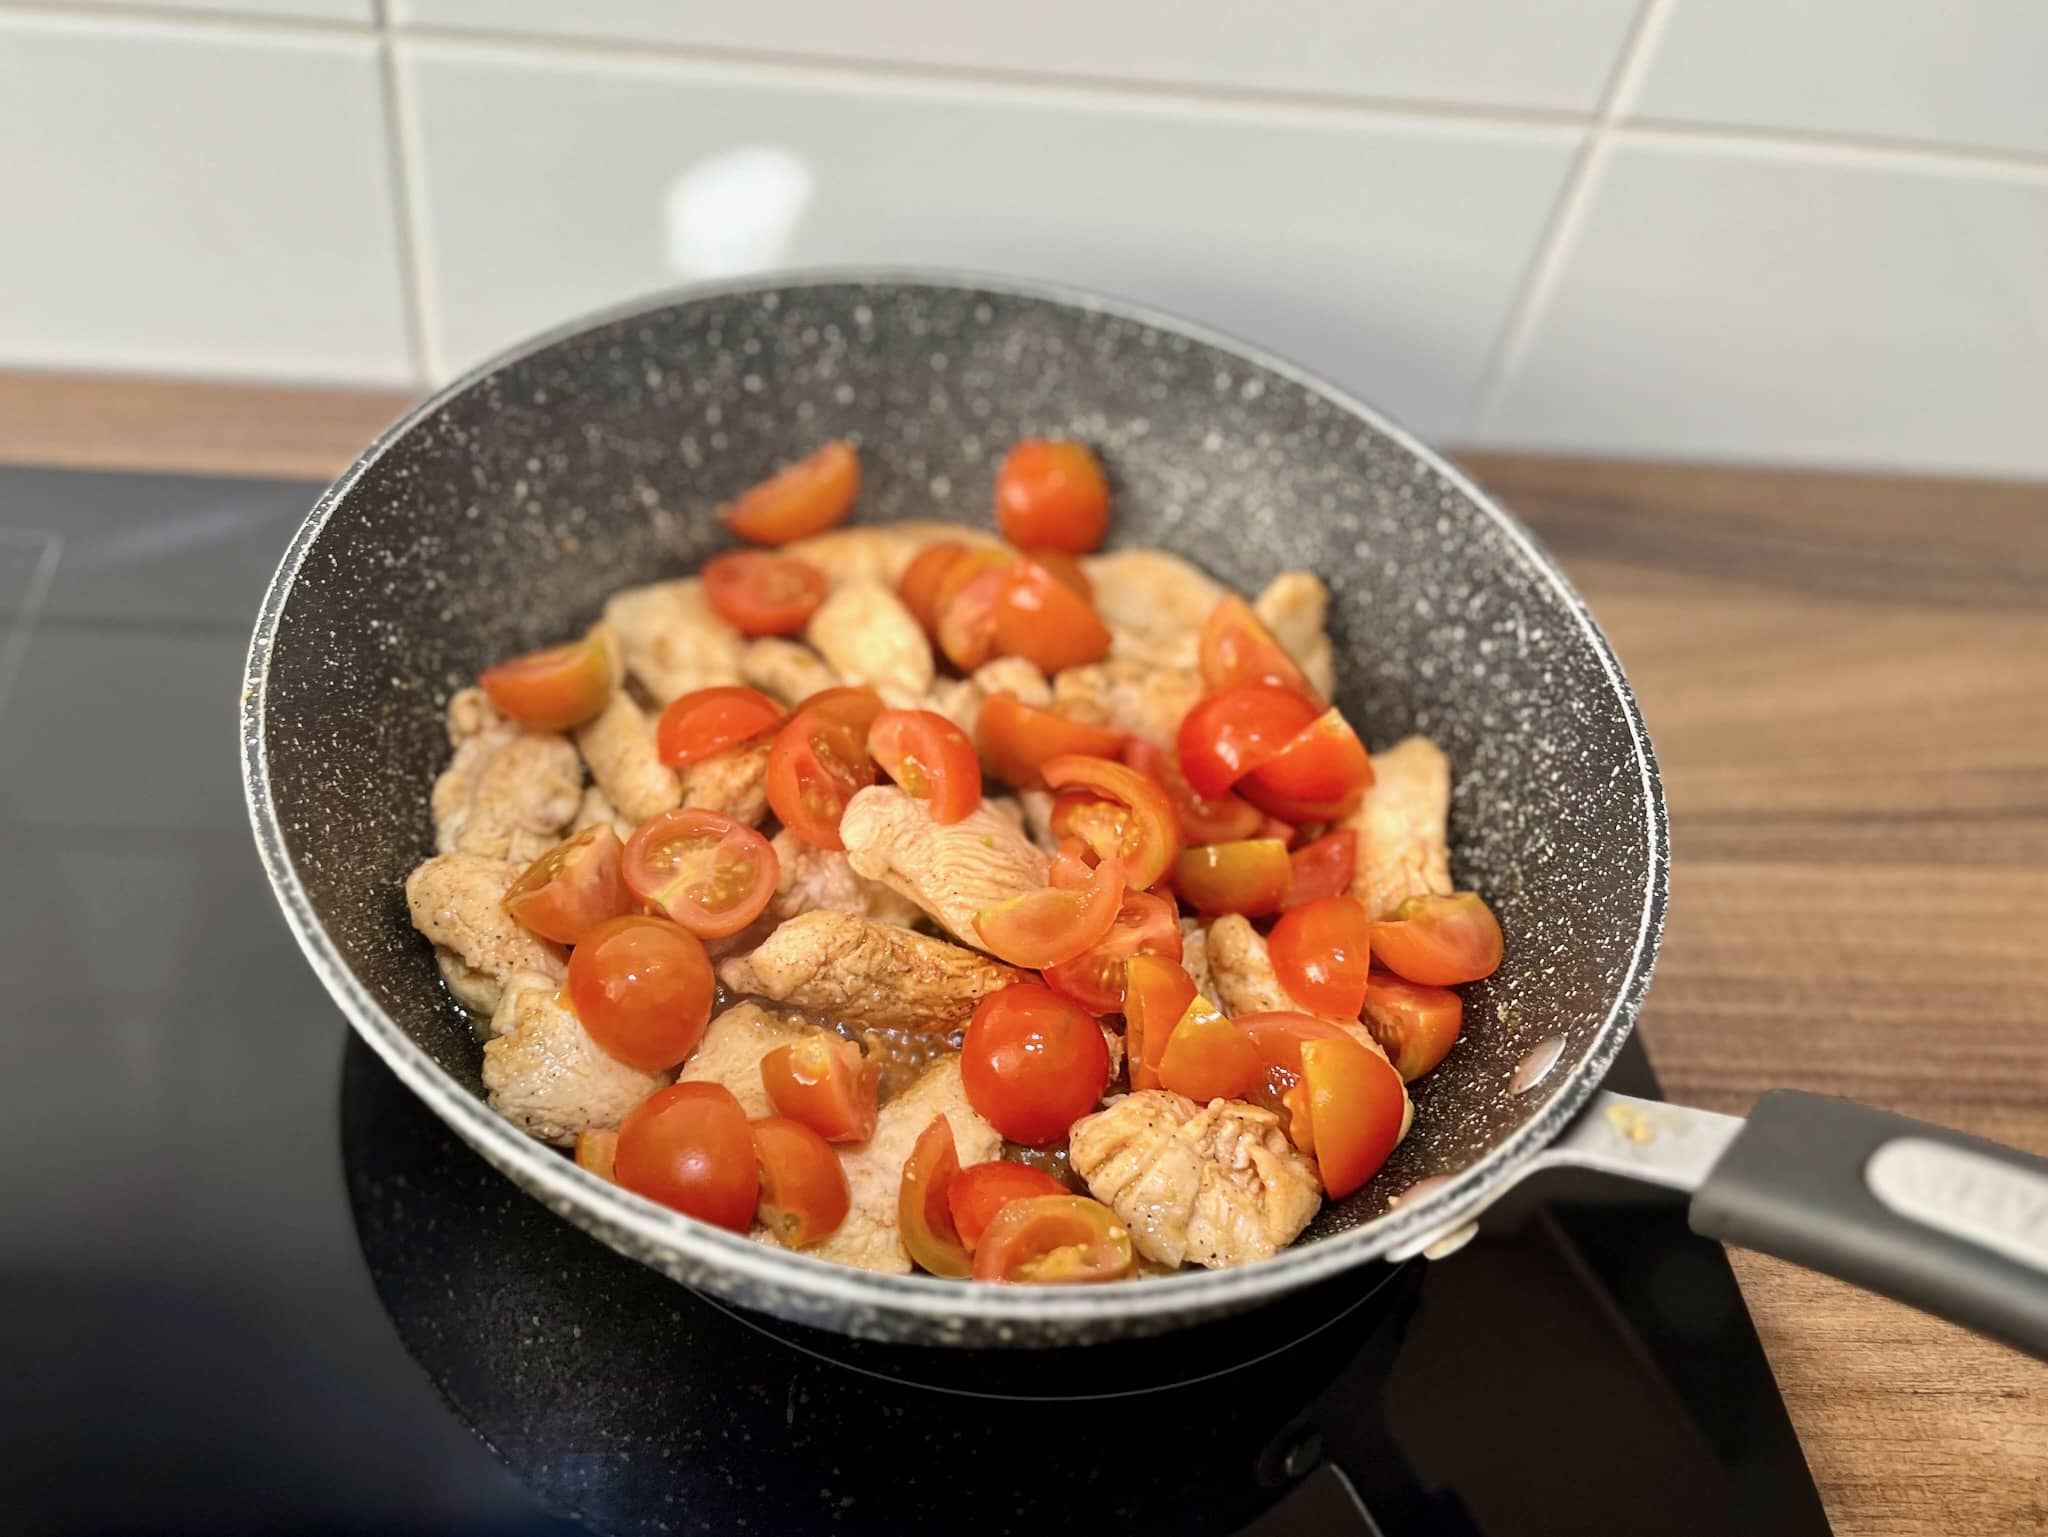 Golden brown fried chicken cooked in a large skillet, topped with juicy cherry tomatoes.